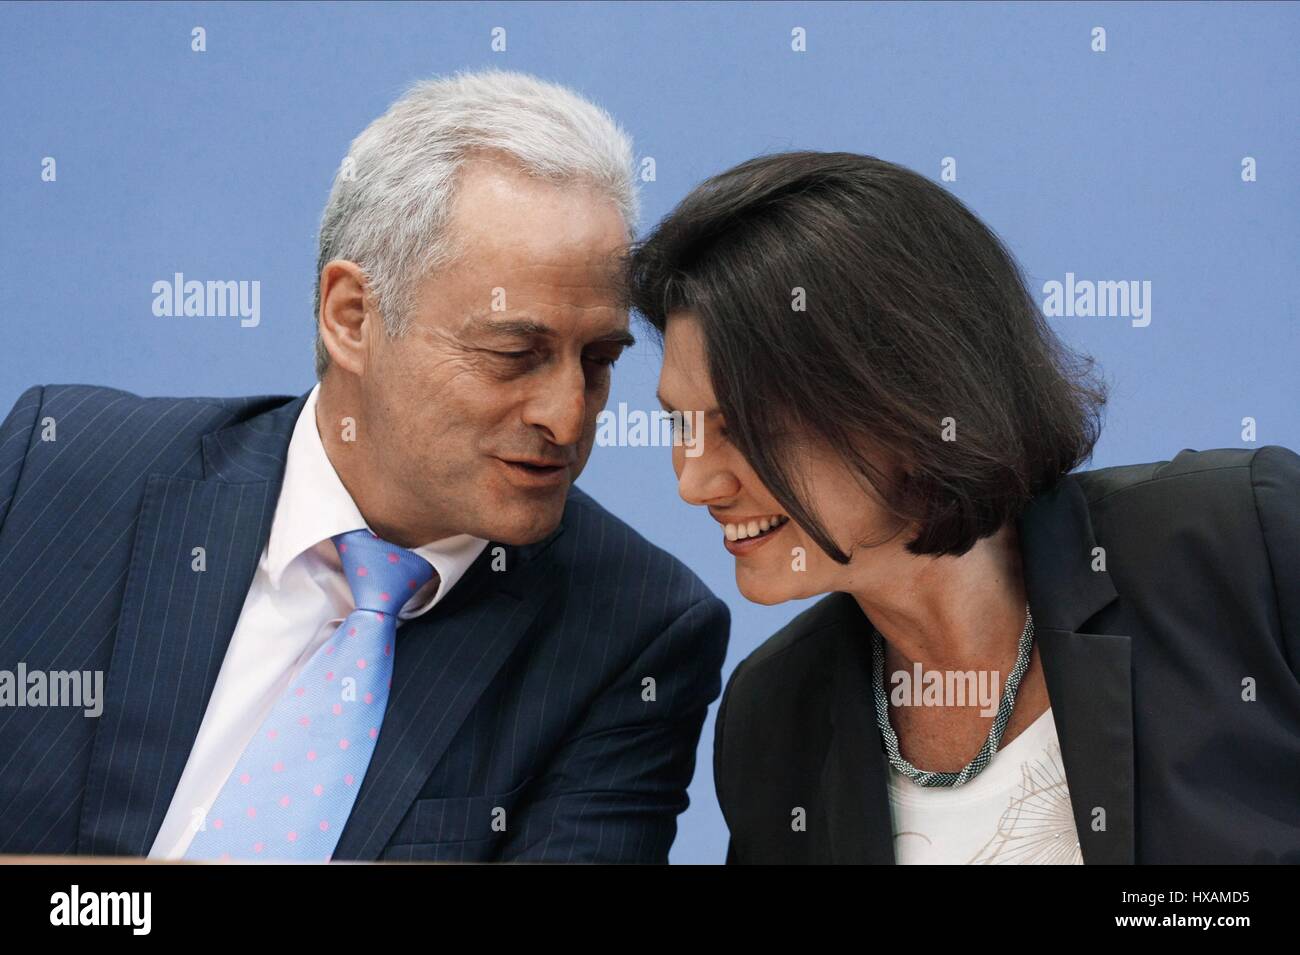 PETER RAMSAUER & ILSE AIGNER GERMAN CABINET MINISTERS 31 October 2008 Stock Photo